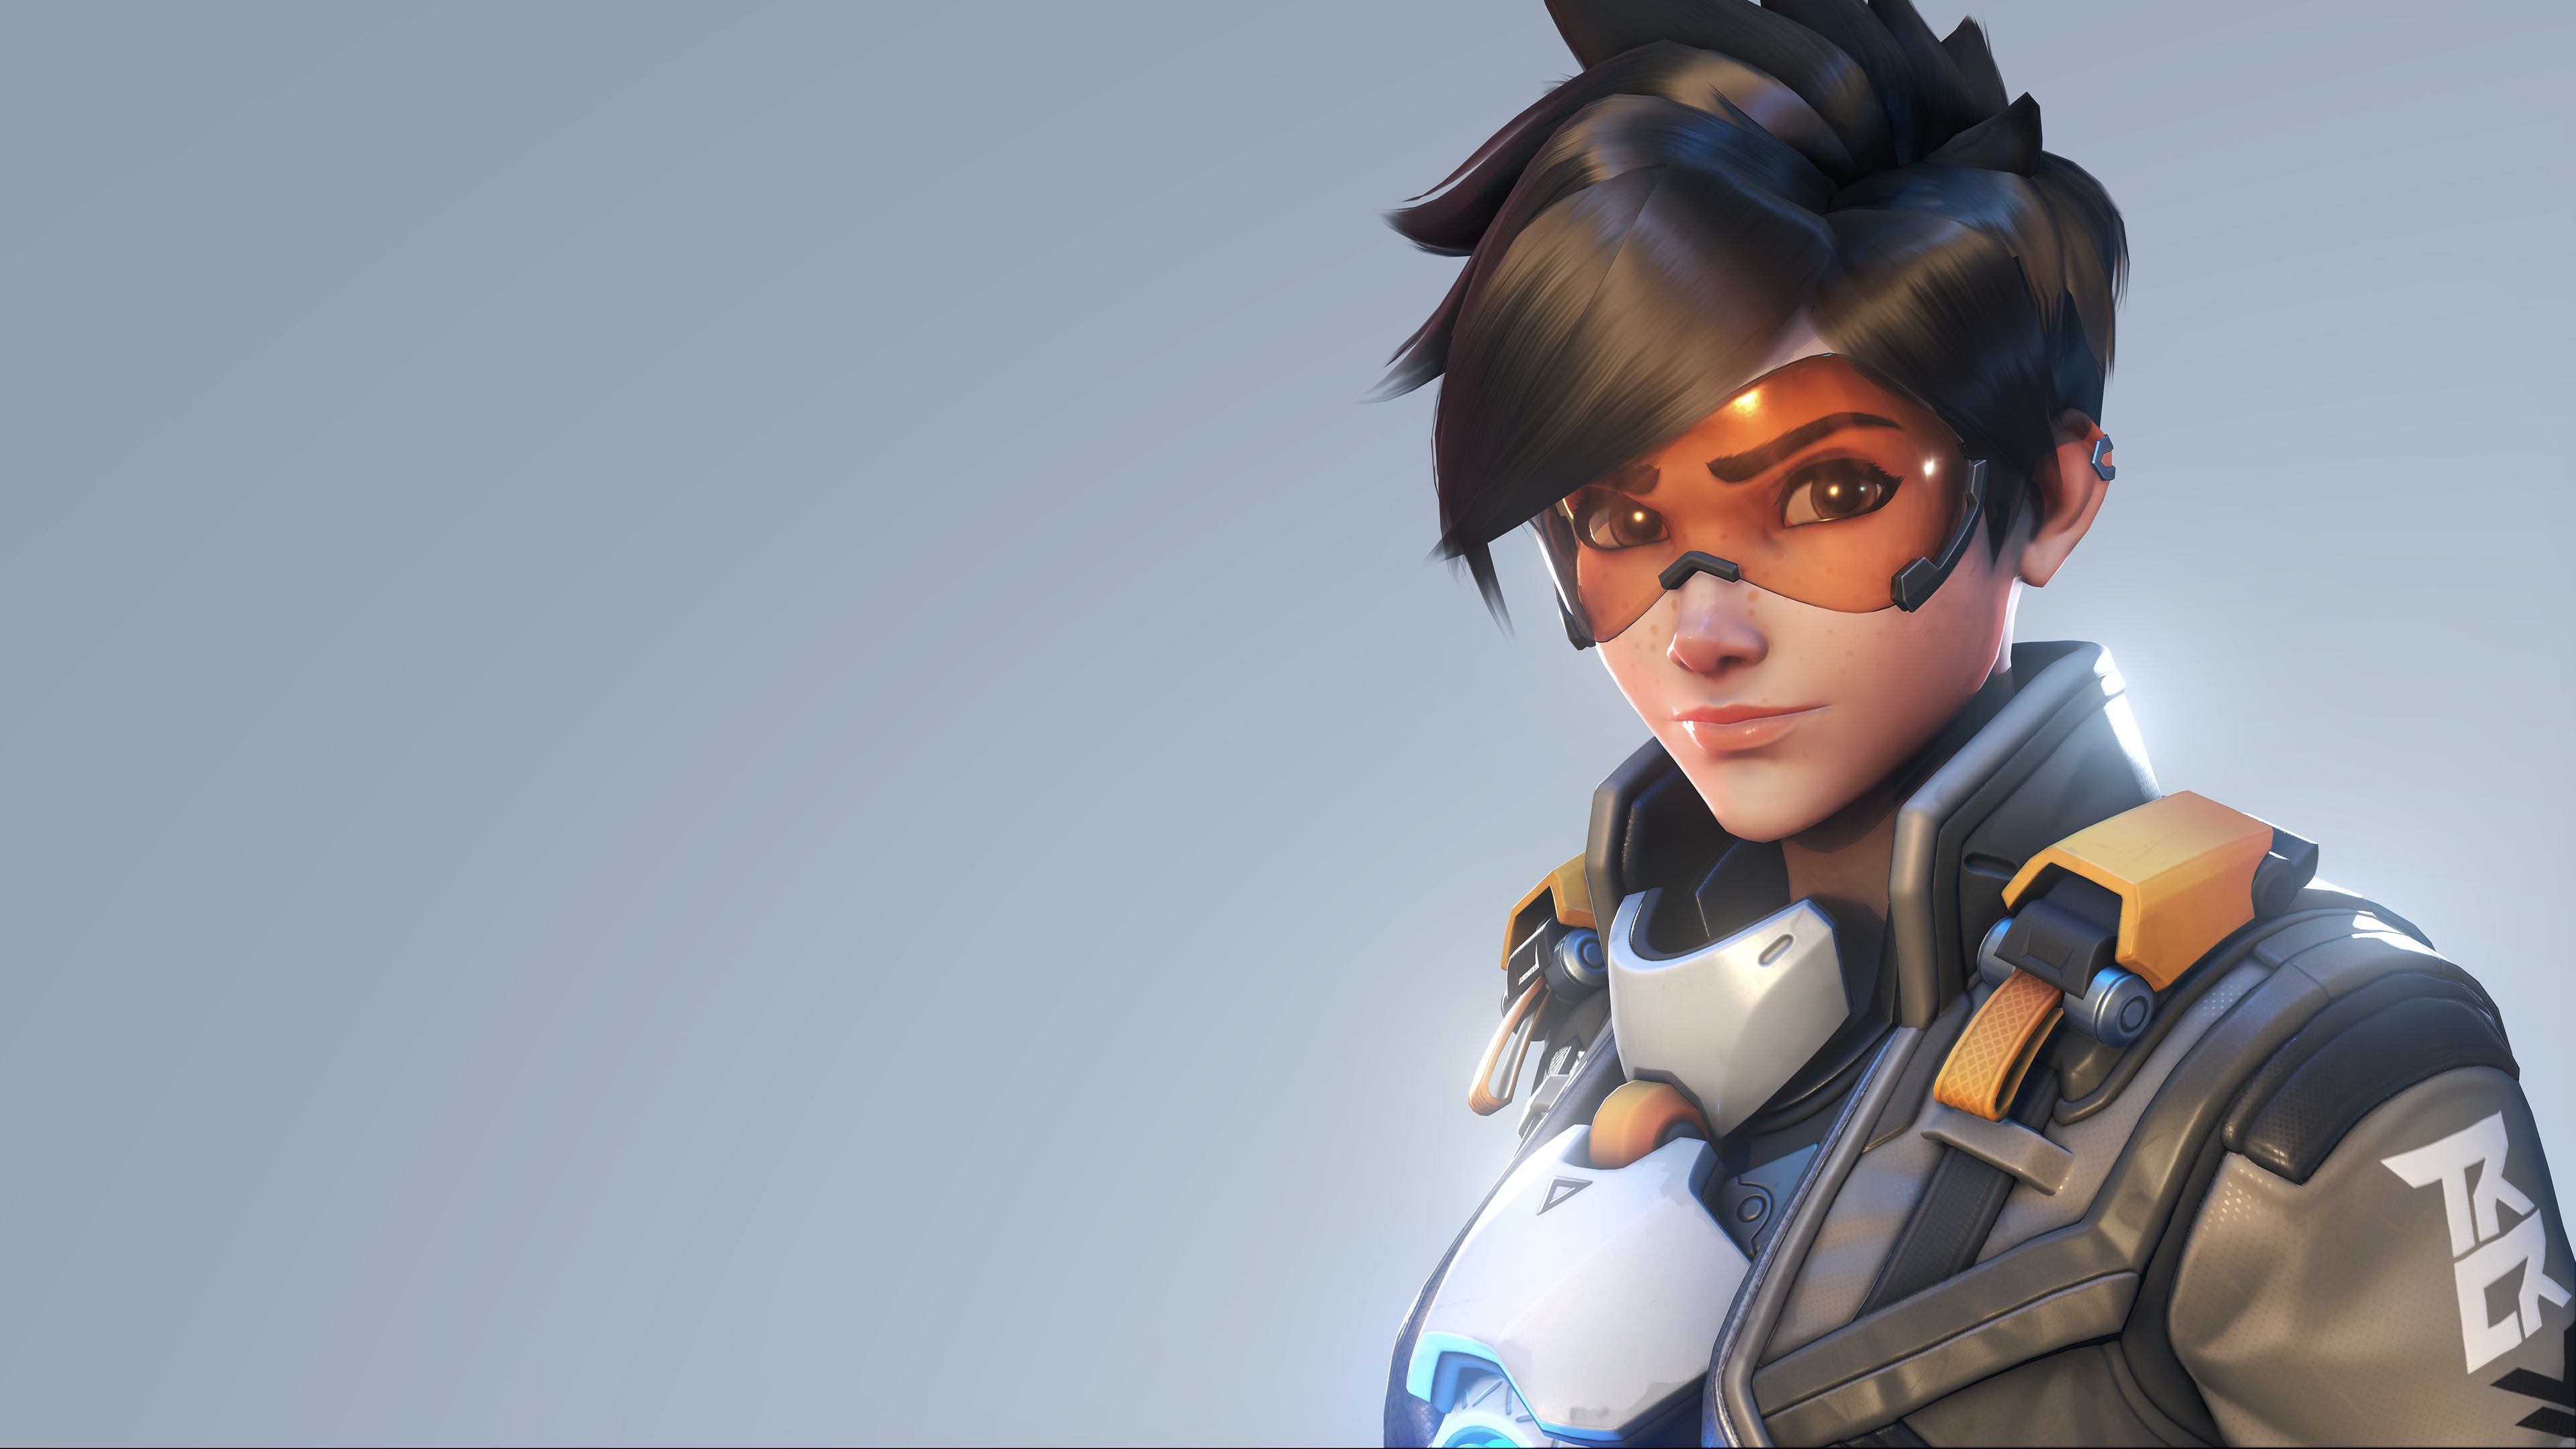 General 3840x2160 video games Overwatch Tracer (Overwatch) PC gaming video game girls simple background